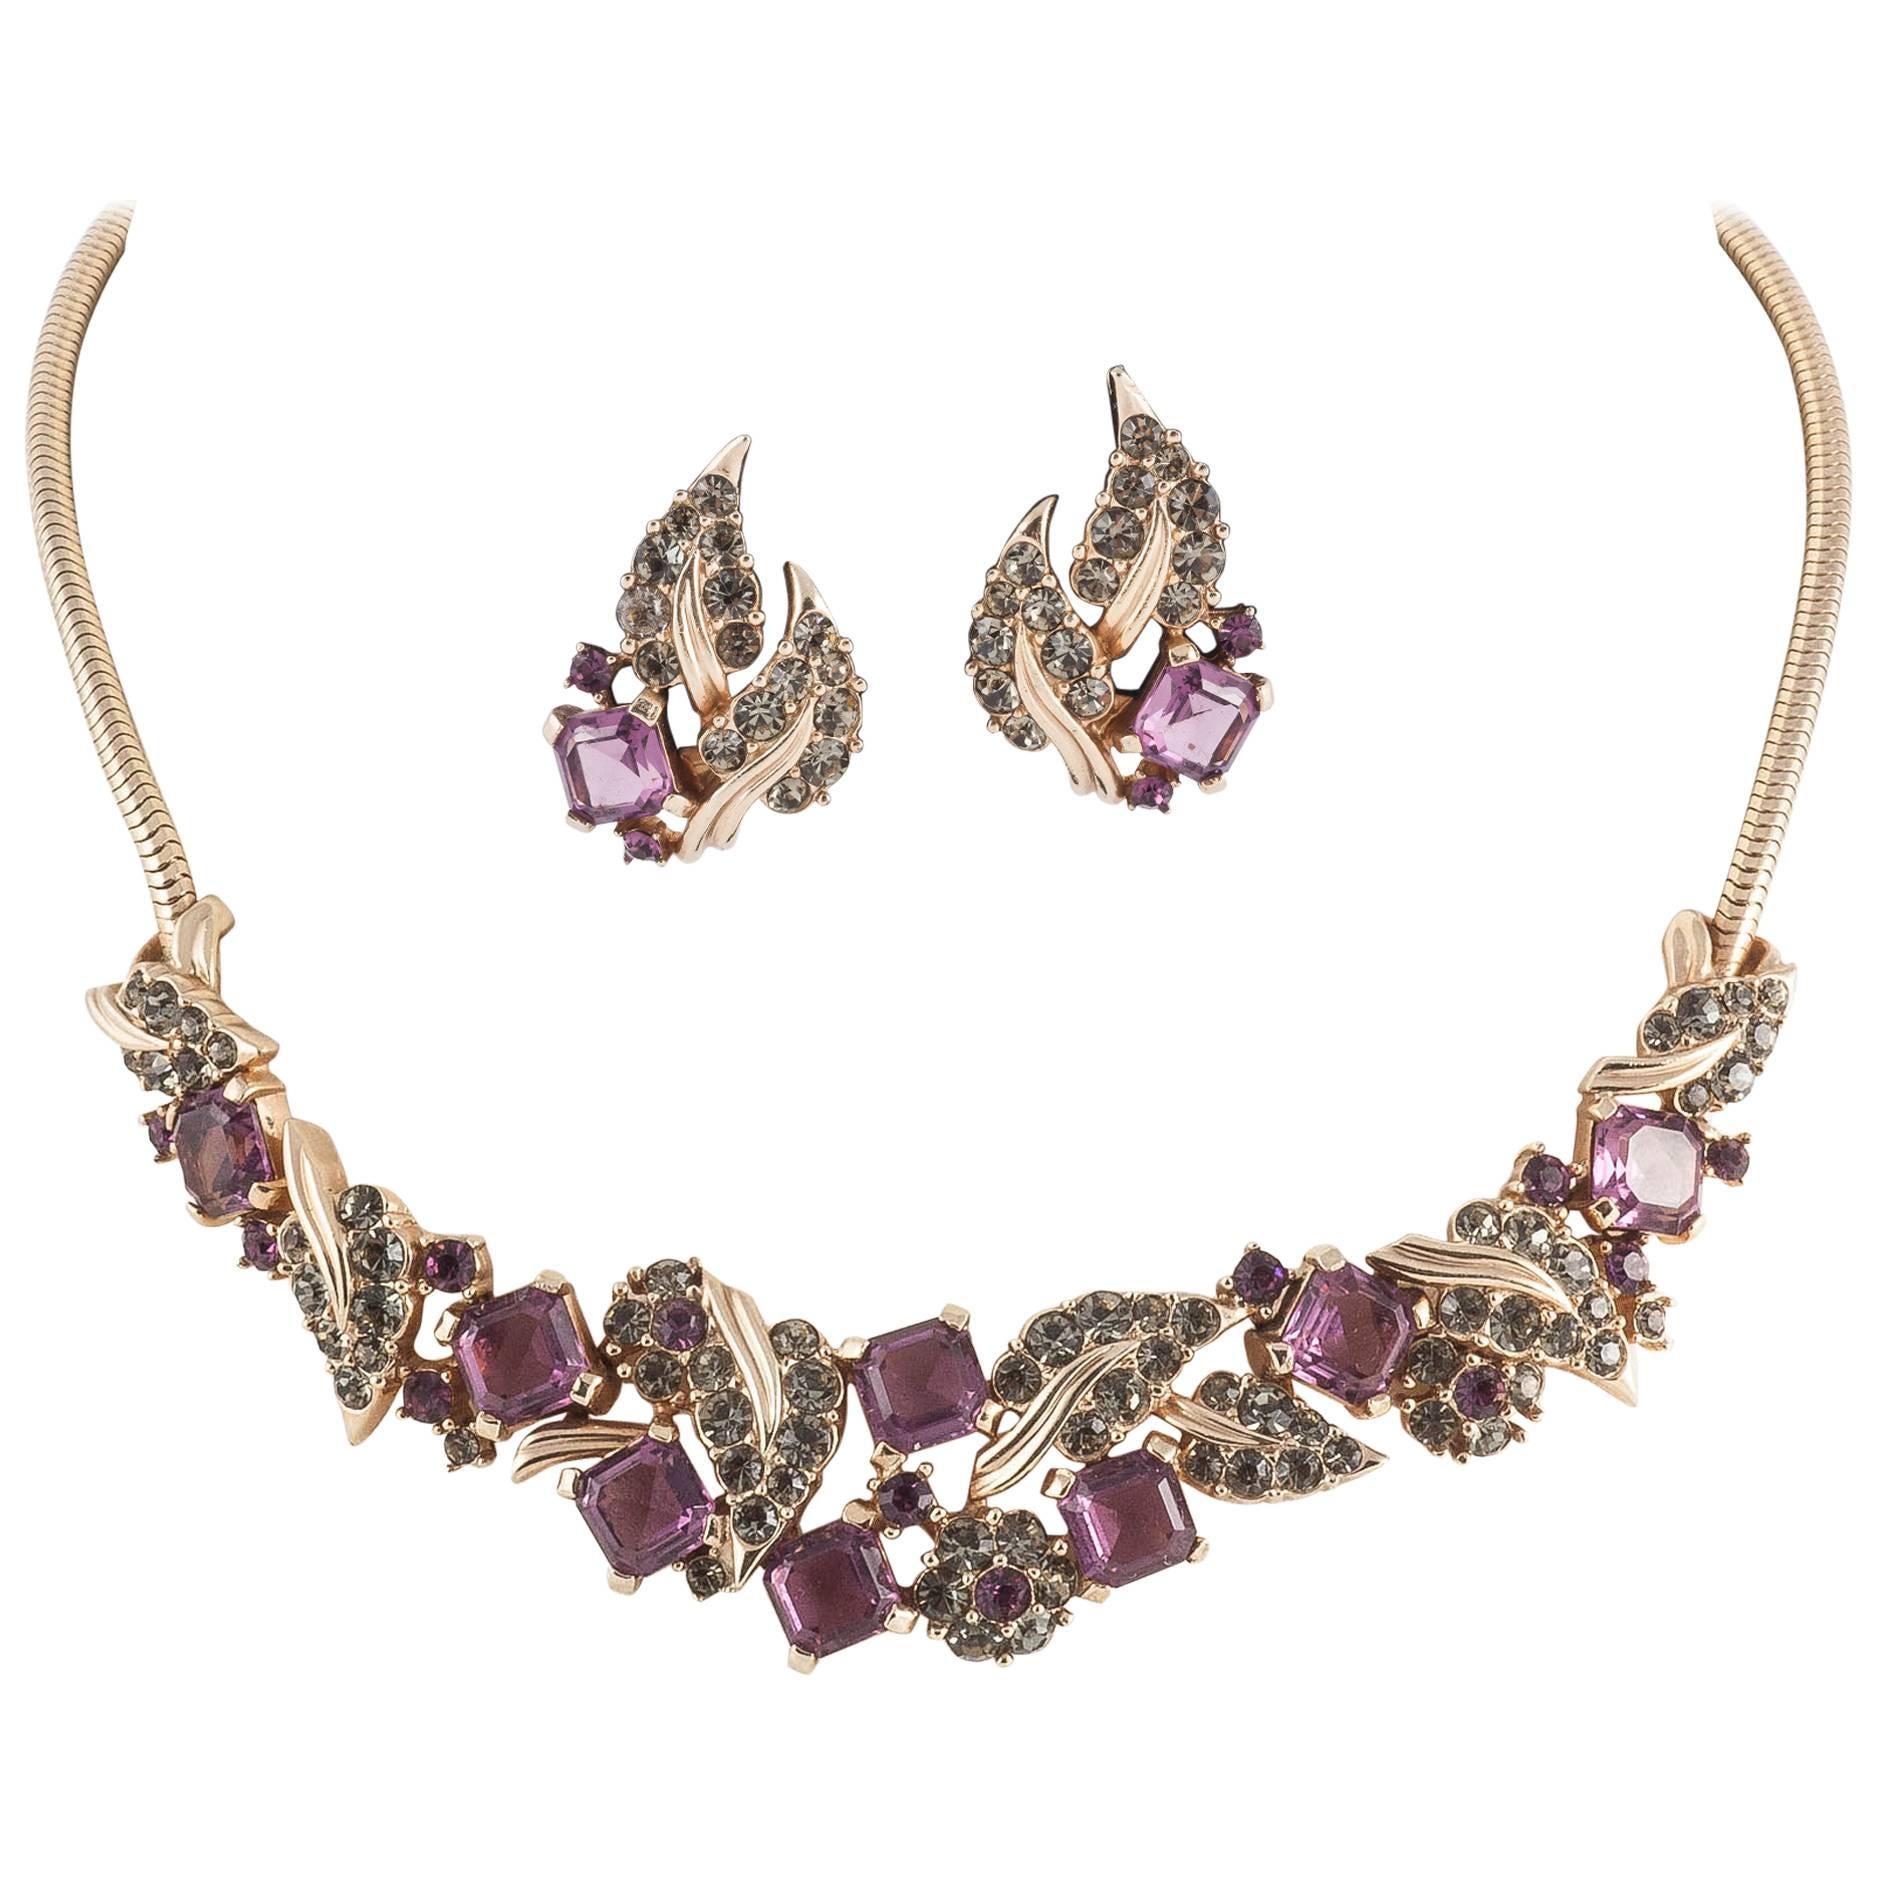 Marcel Boucher deep amethyst square cut/grey paste necklace and earrings